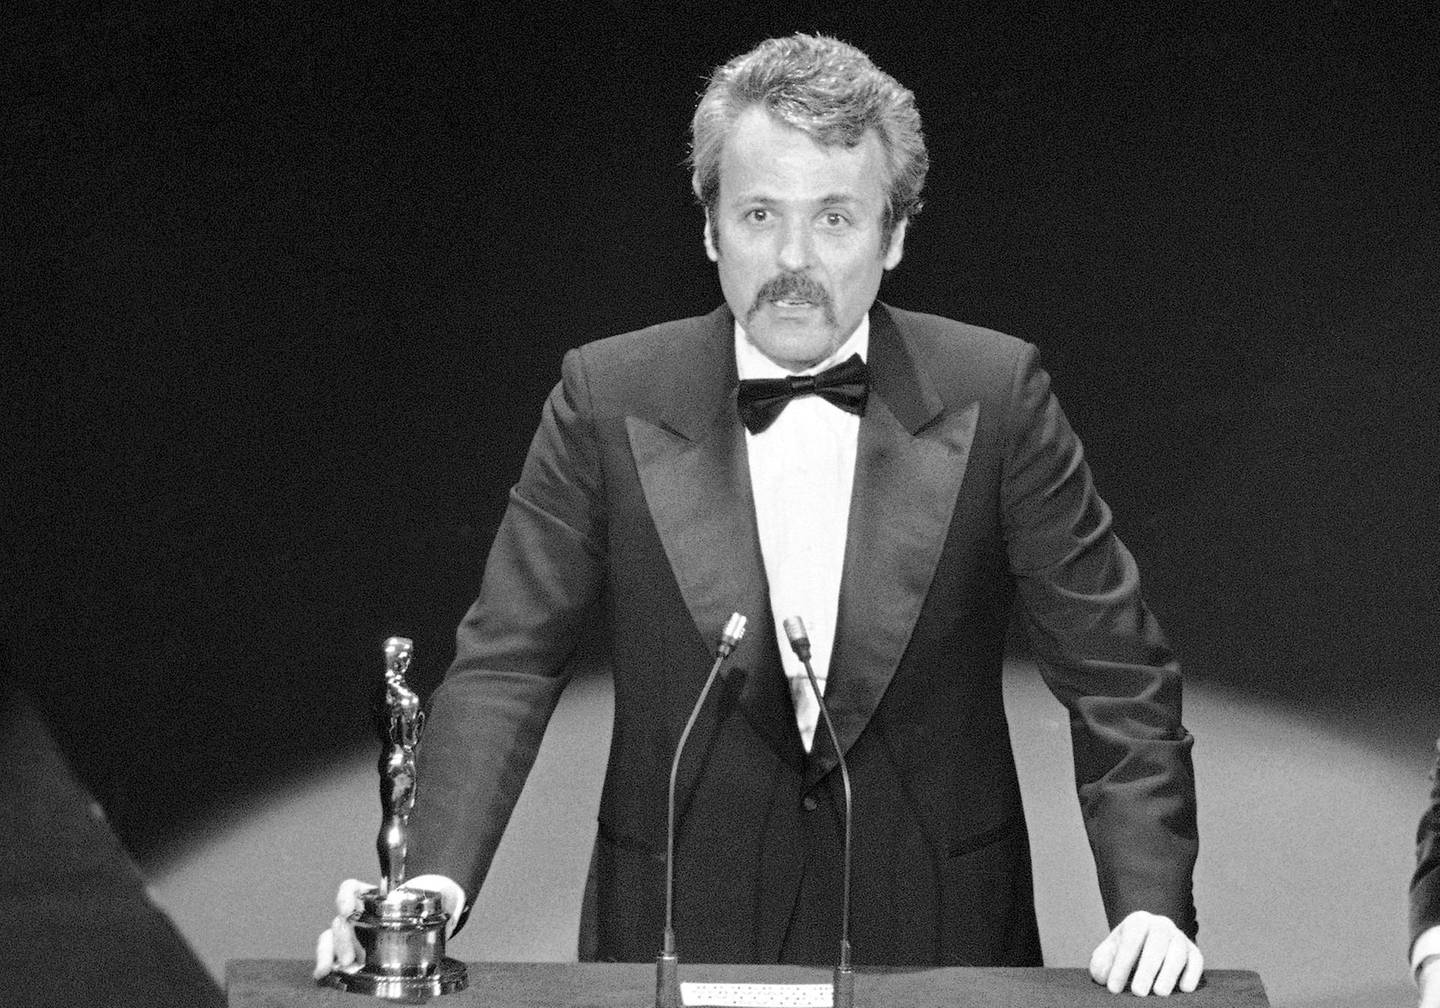 FILE - In this March 28, 1977 file photo, William Goldman accepts his Oscar at Academy Awards in Los Angeles, for screenplay from other medium for "All The President's Men." Goldman, the Oscar-winning screenplay writer of â€œButch Cassidy and the Sundance Kidâ€ and â€œAll the Presidentâ€™s Menâ€ William Goldman died, Friday, Nov. 16, 2018. He was 87. (AP Photo, File)